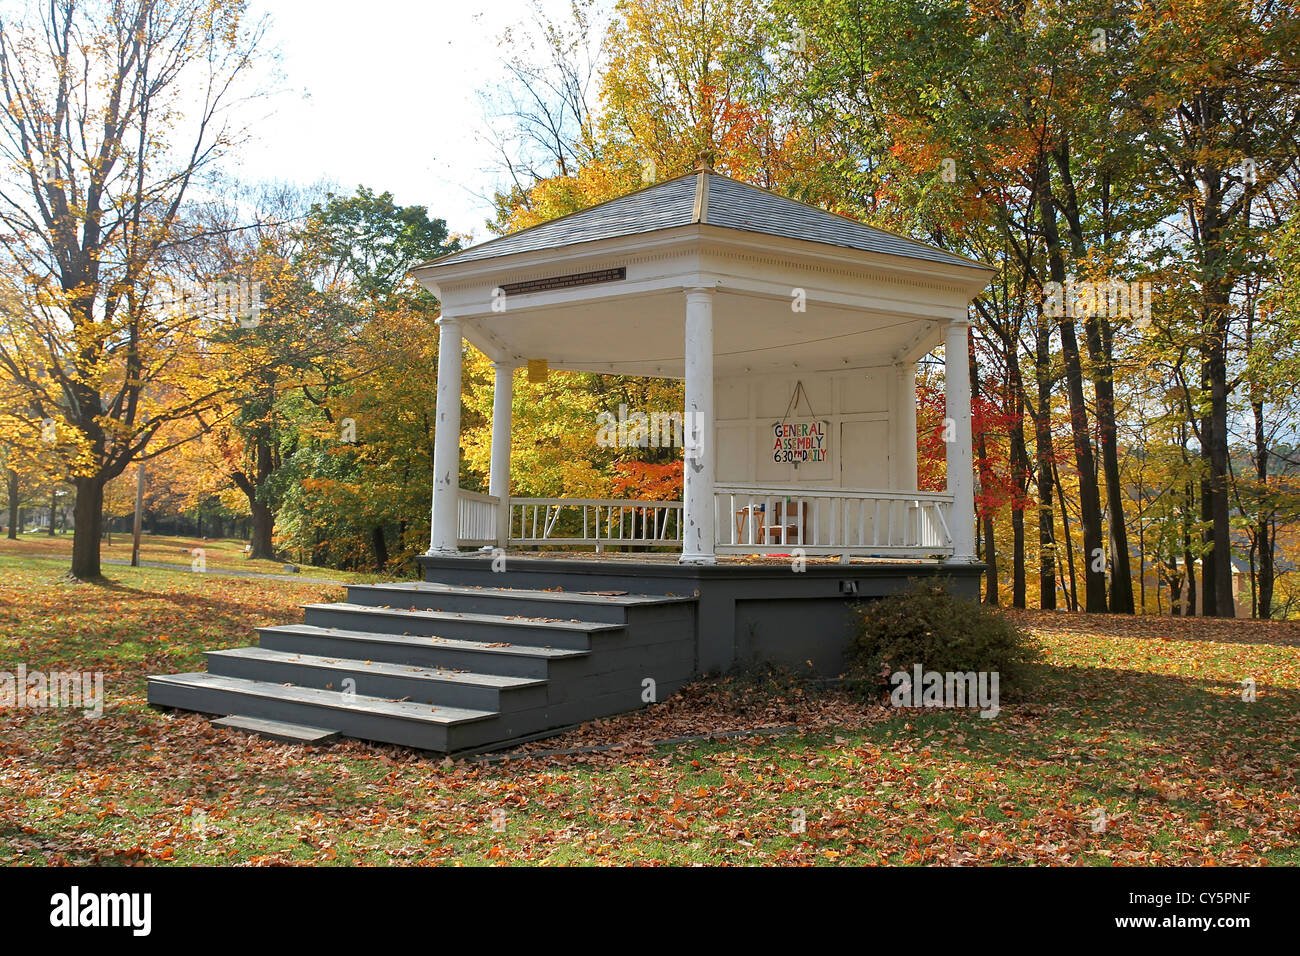 Bandstand in the town common, Brattleboro, Vermont Stock Photo